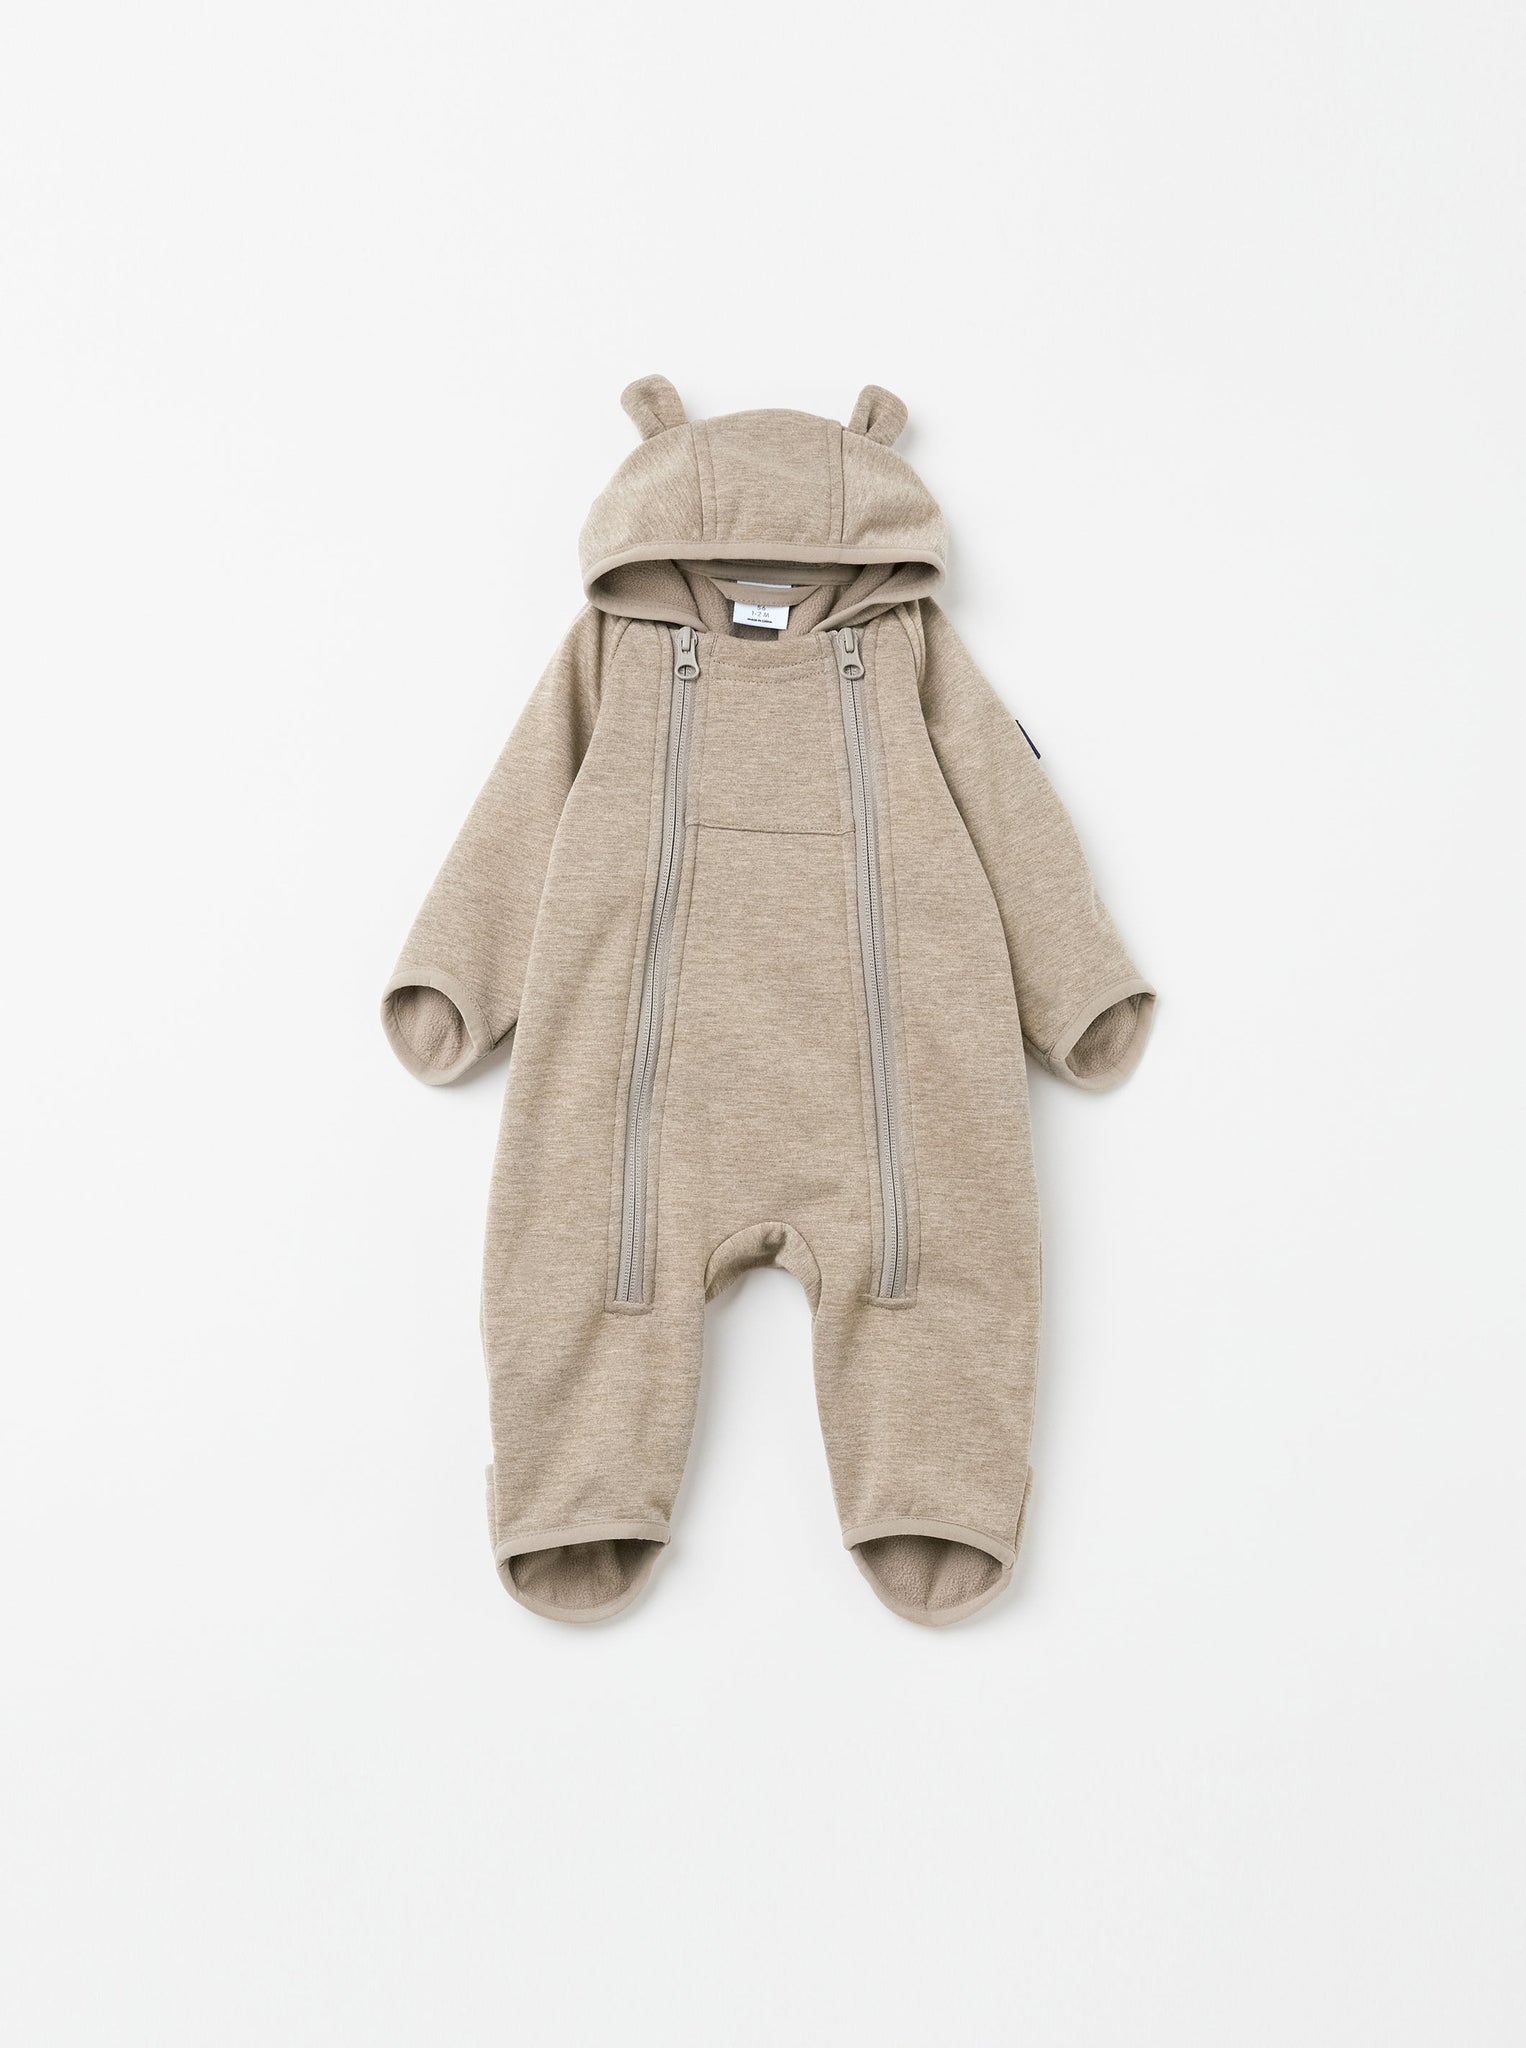 Beige Teddy Bear Baby Pramsuit from the Polarn O. Pyret kidswear collection. Quality kids clothing made to last.